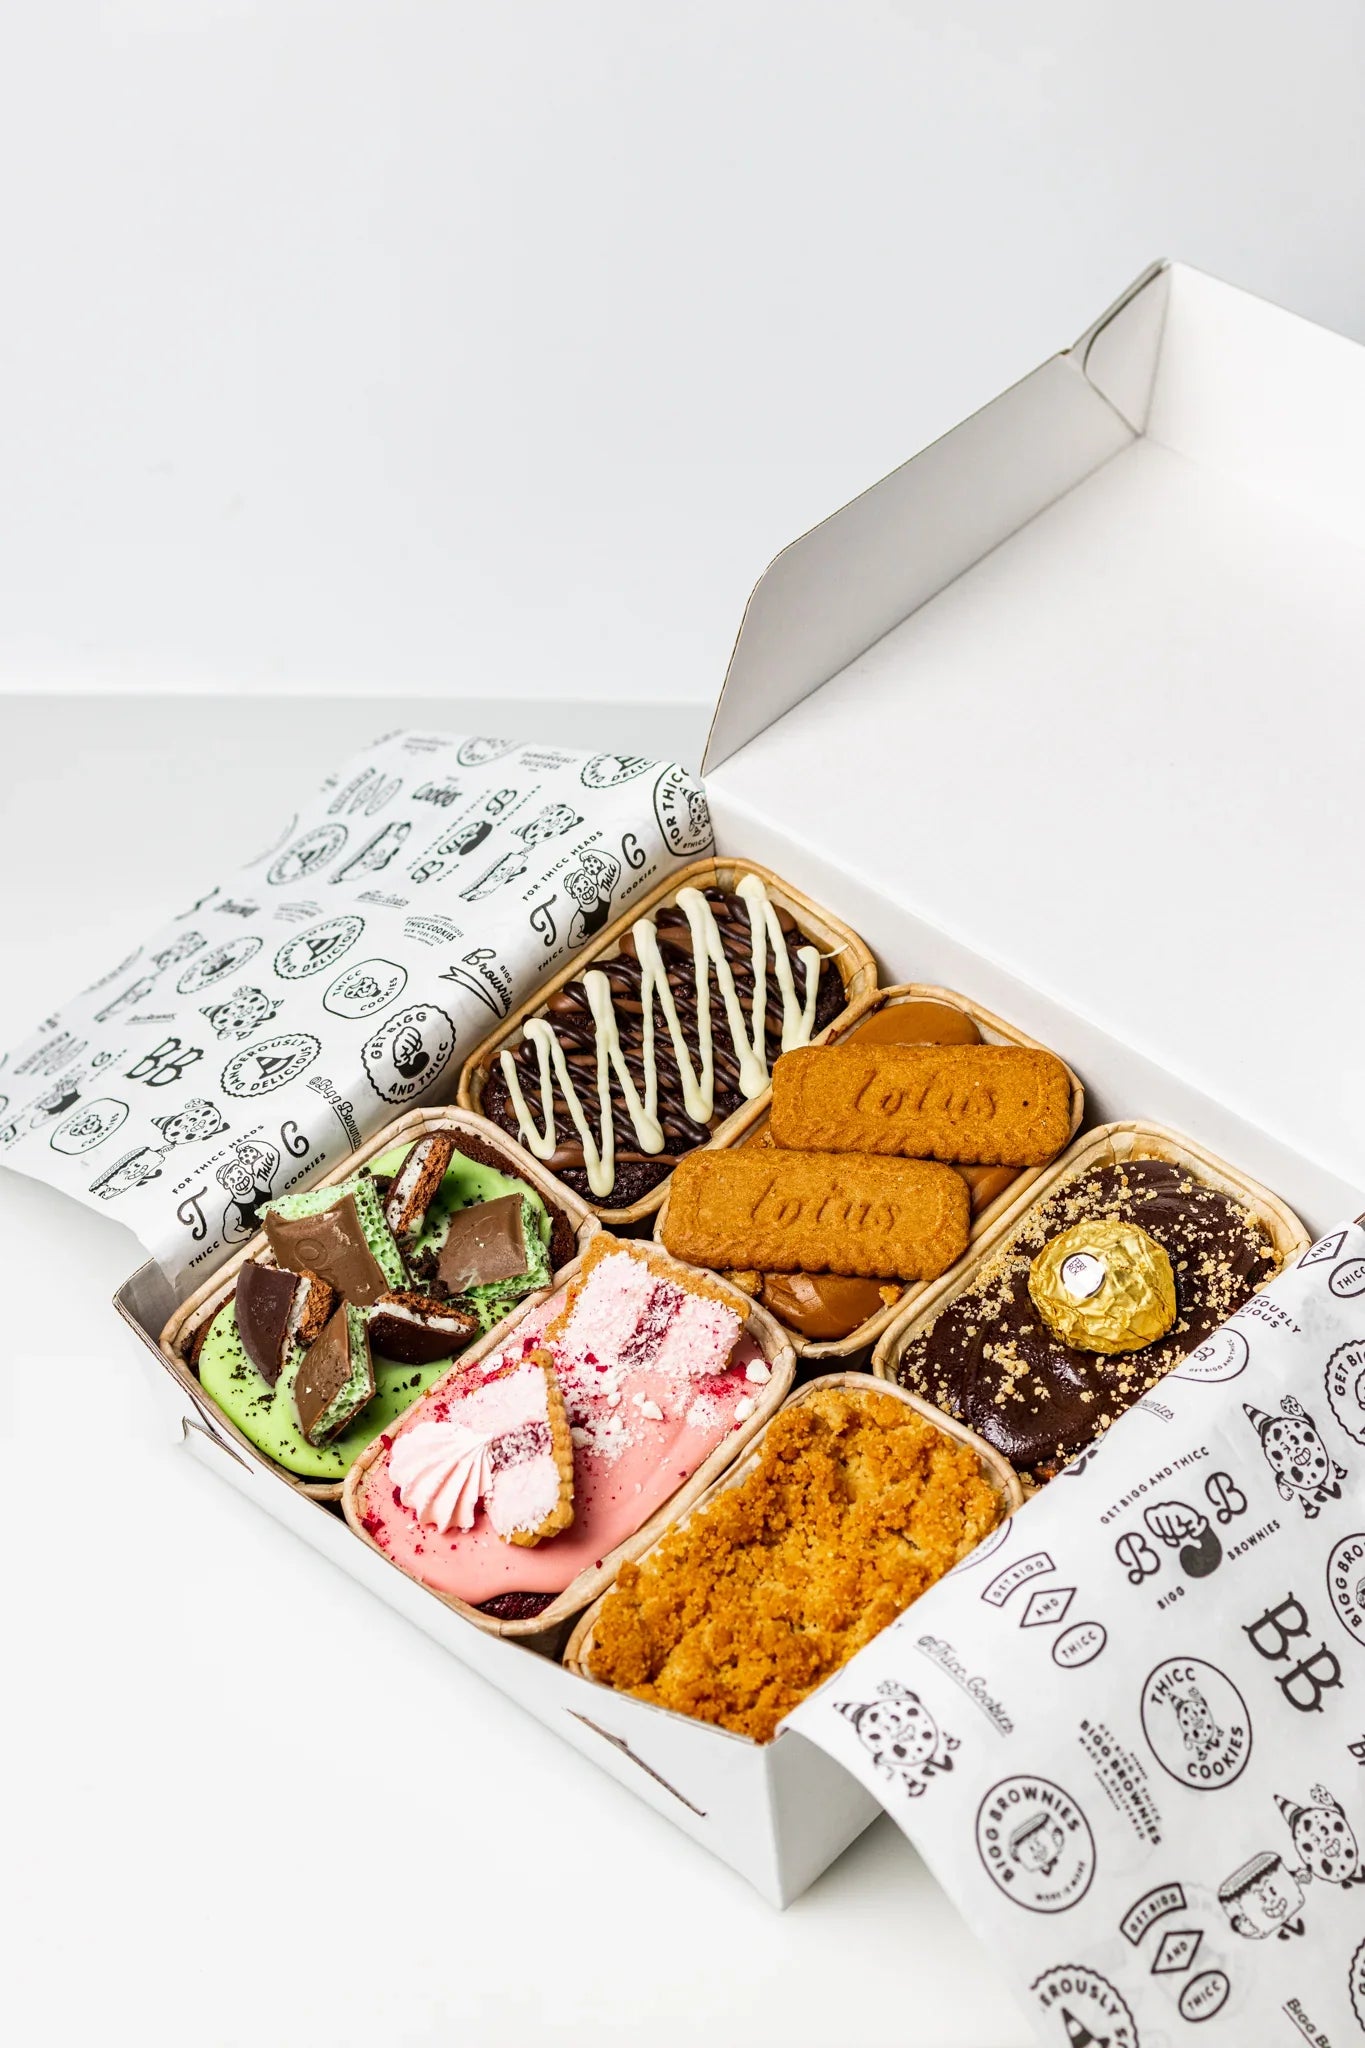 "CONGRATULATIONS" Box- BIGG Brownies & THICC Cookies - New York Style Cookies